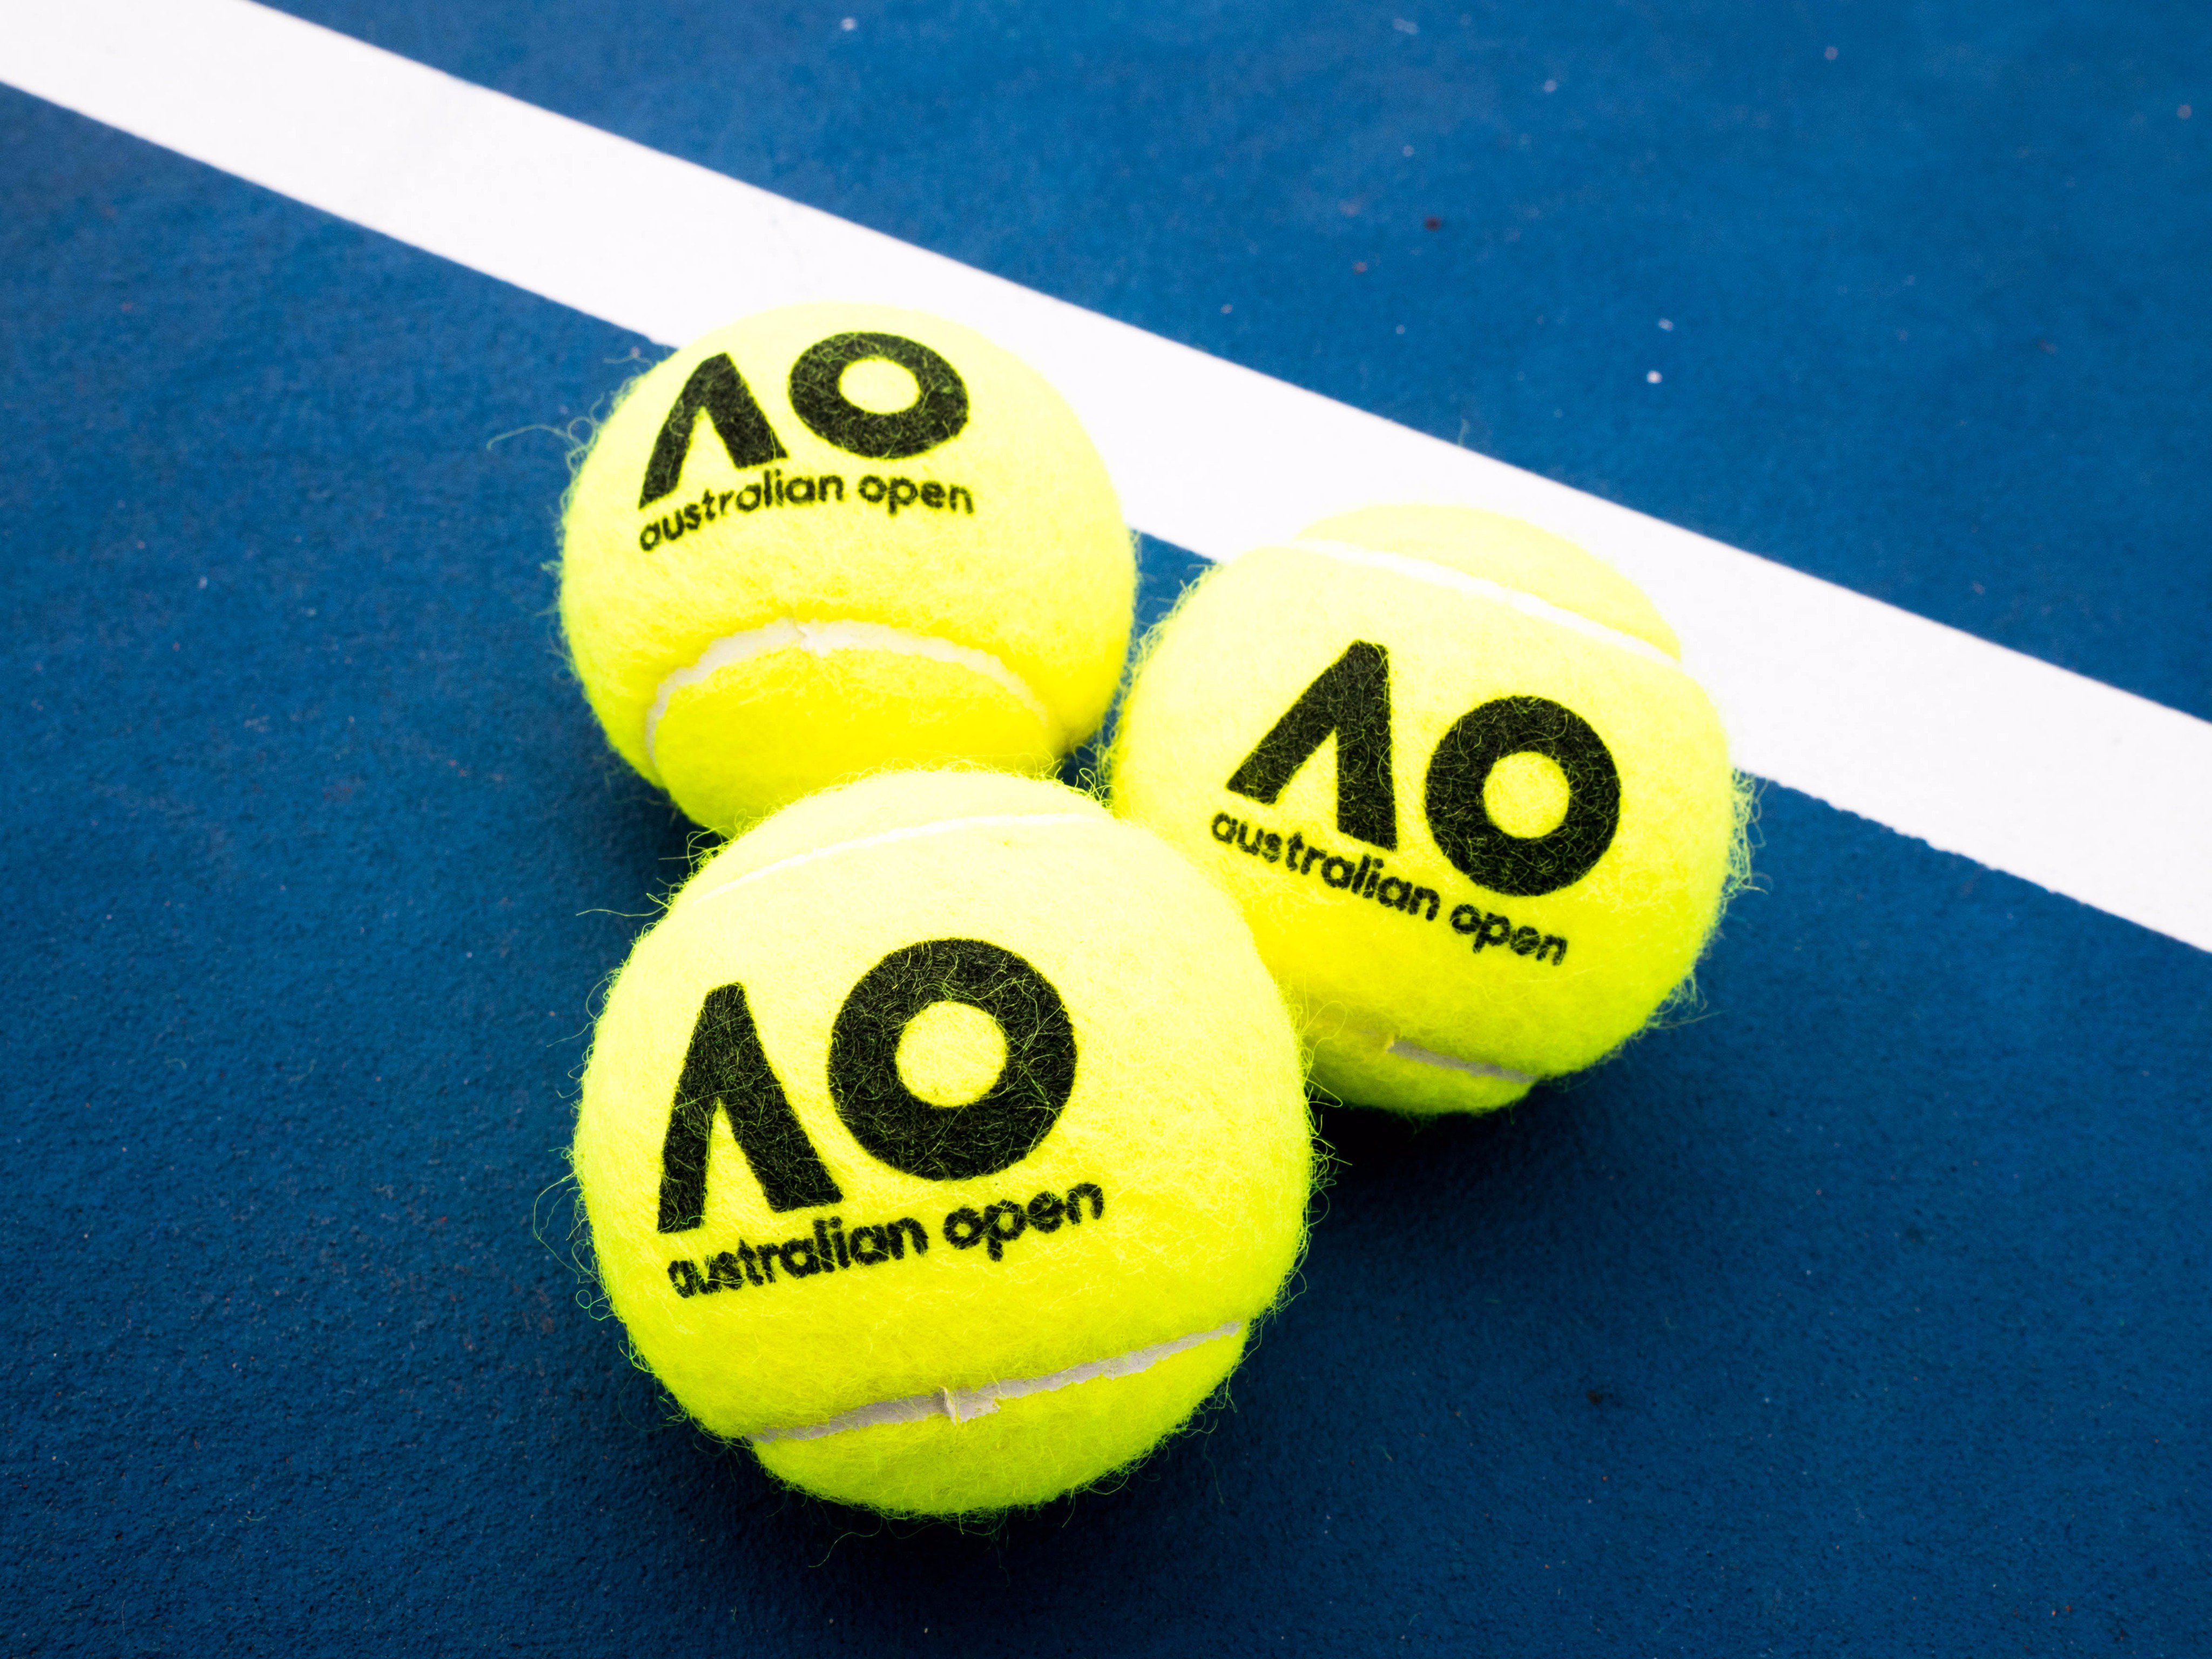 Kammerat Mos Resonate AusOpen on Twitter: "New balls please… Dunlop will be the official ball  partner of Australian Open 2019. The new five-year partnership, announced  today in New York, will see Dunlop provide the official